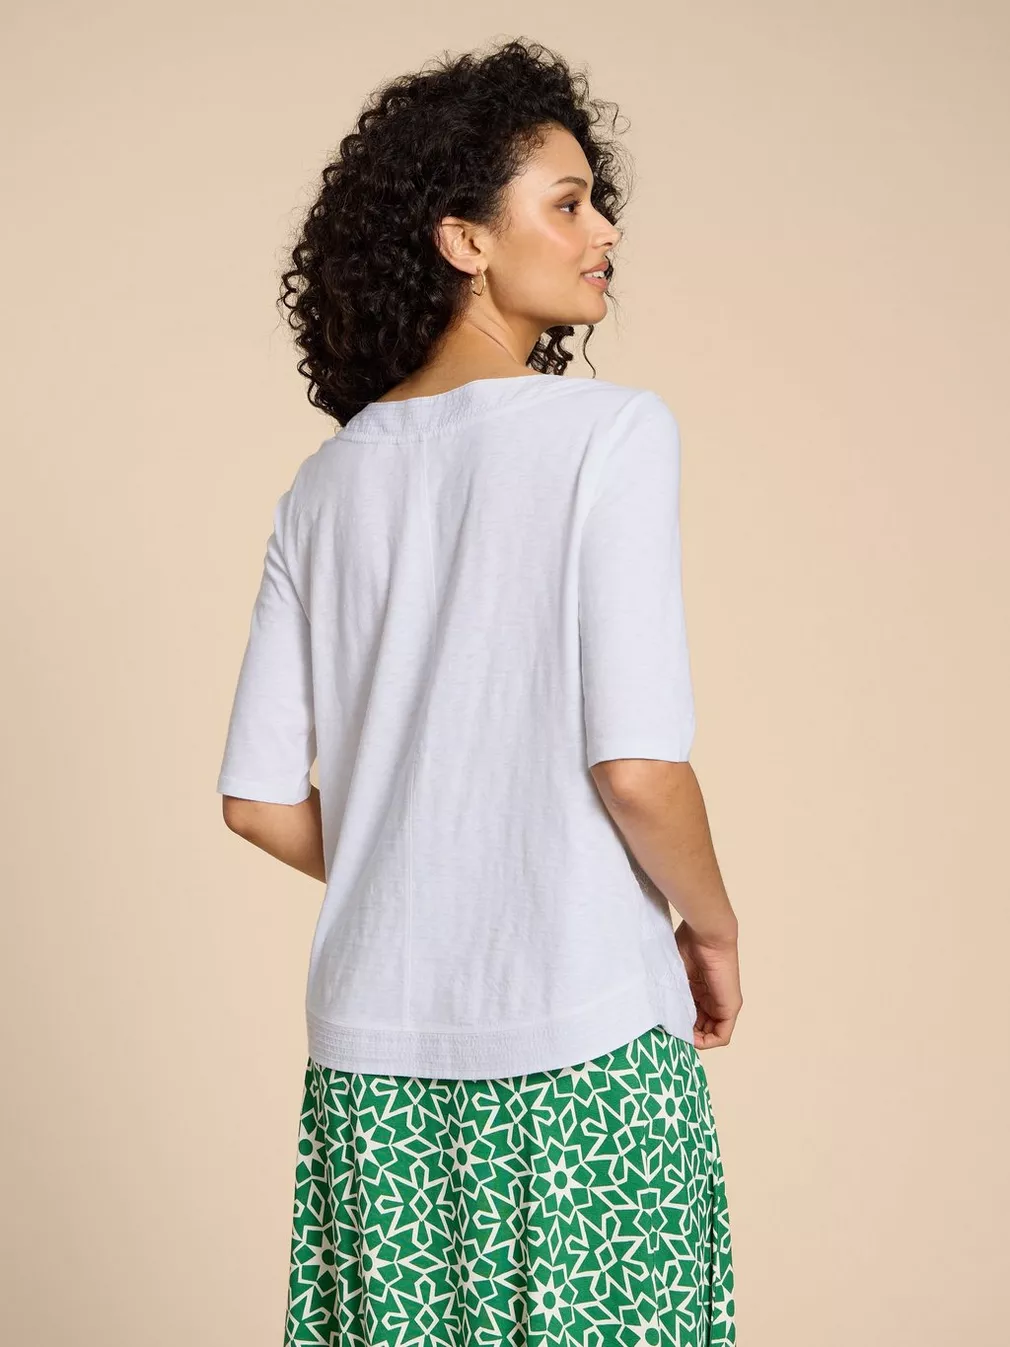 White Stuff Weaver Embroidered Tee - White Clothing - Tops - Shirts - SS Knits by White Stuff | Grace the Boutique